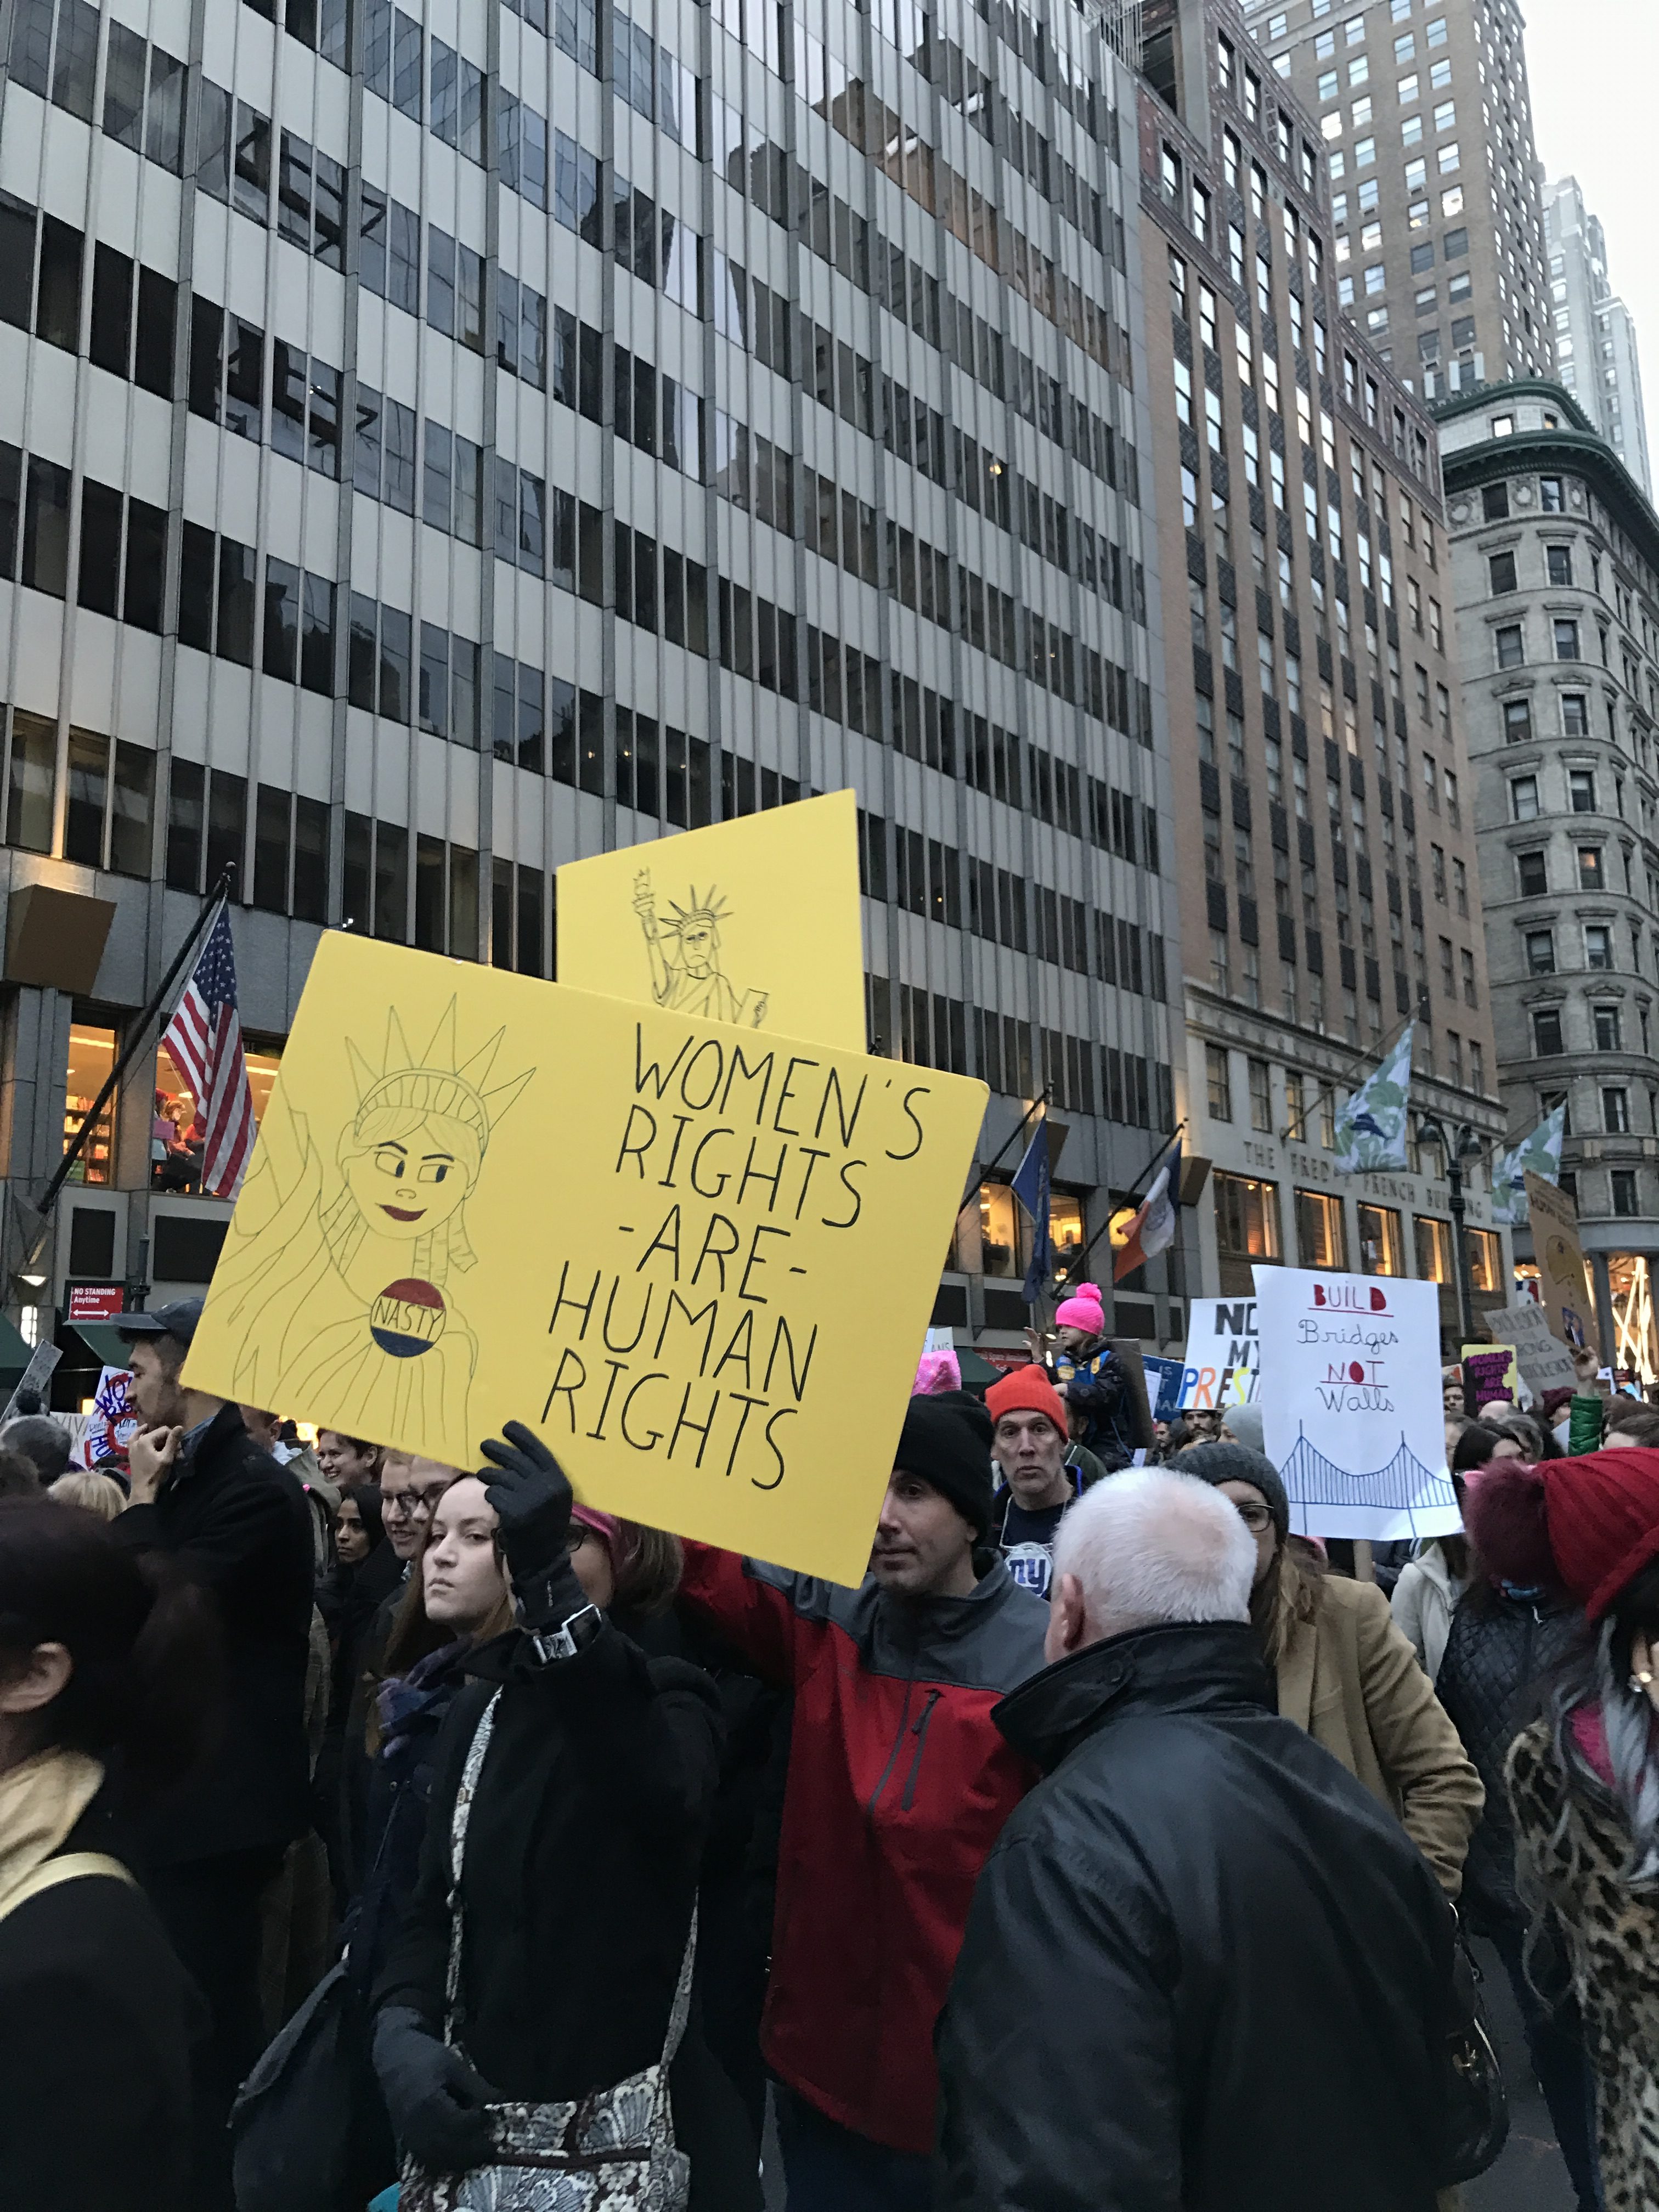 'Women's Rights are Human Rights' banner